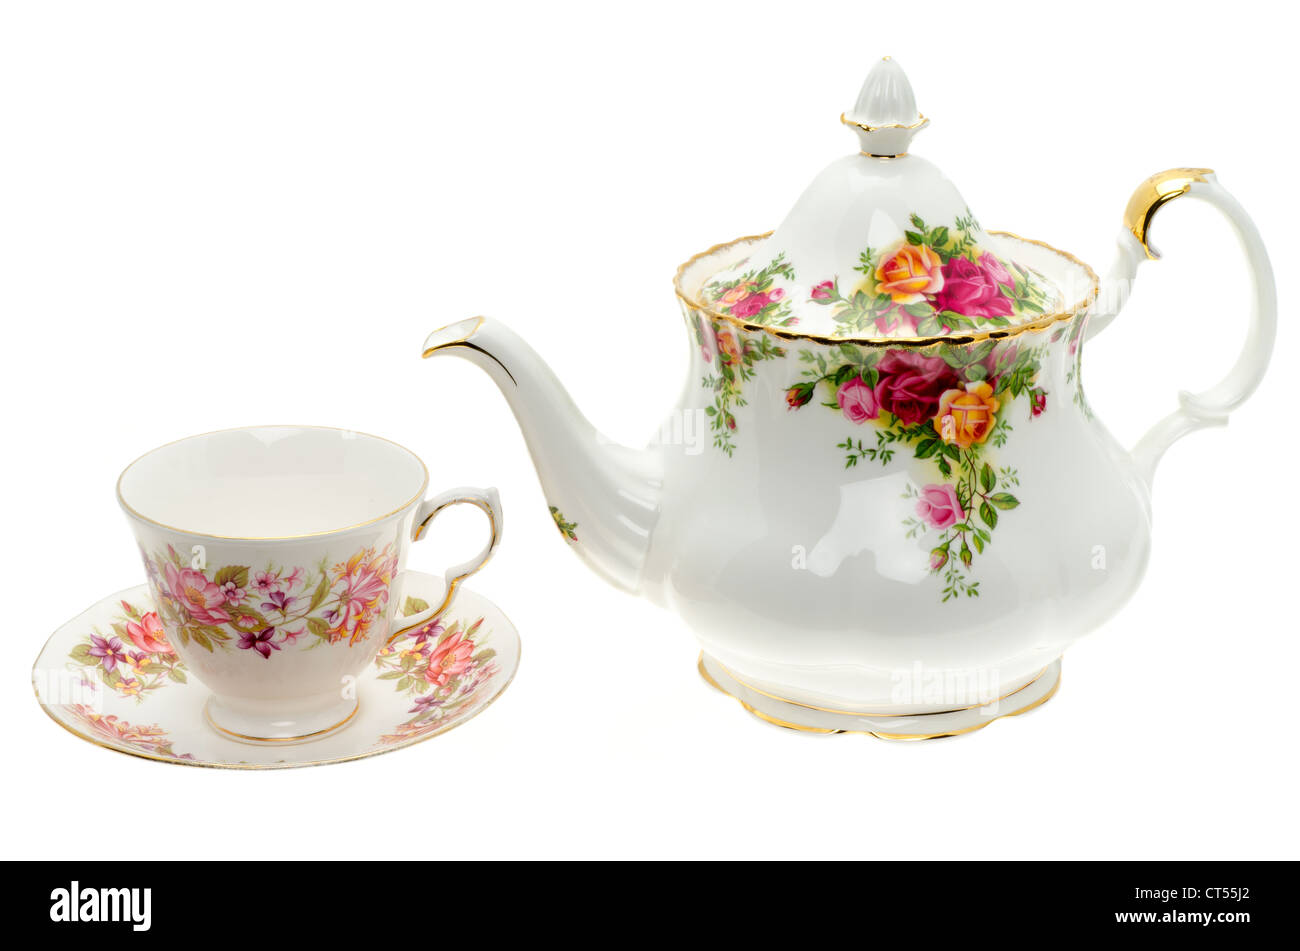 Vintage bone China teapot and a cup and saucer - studio shot with a white background Stock Photo